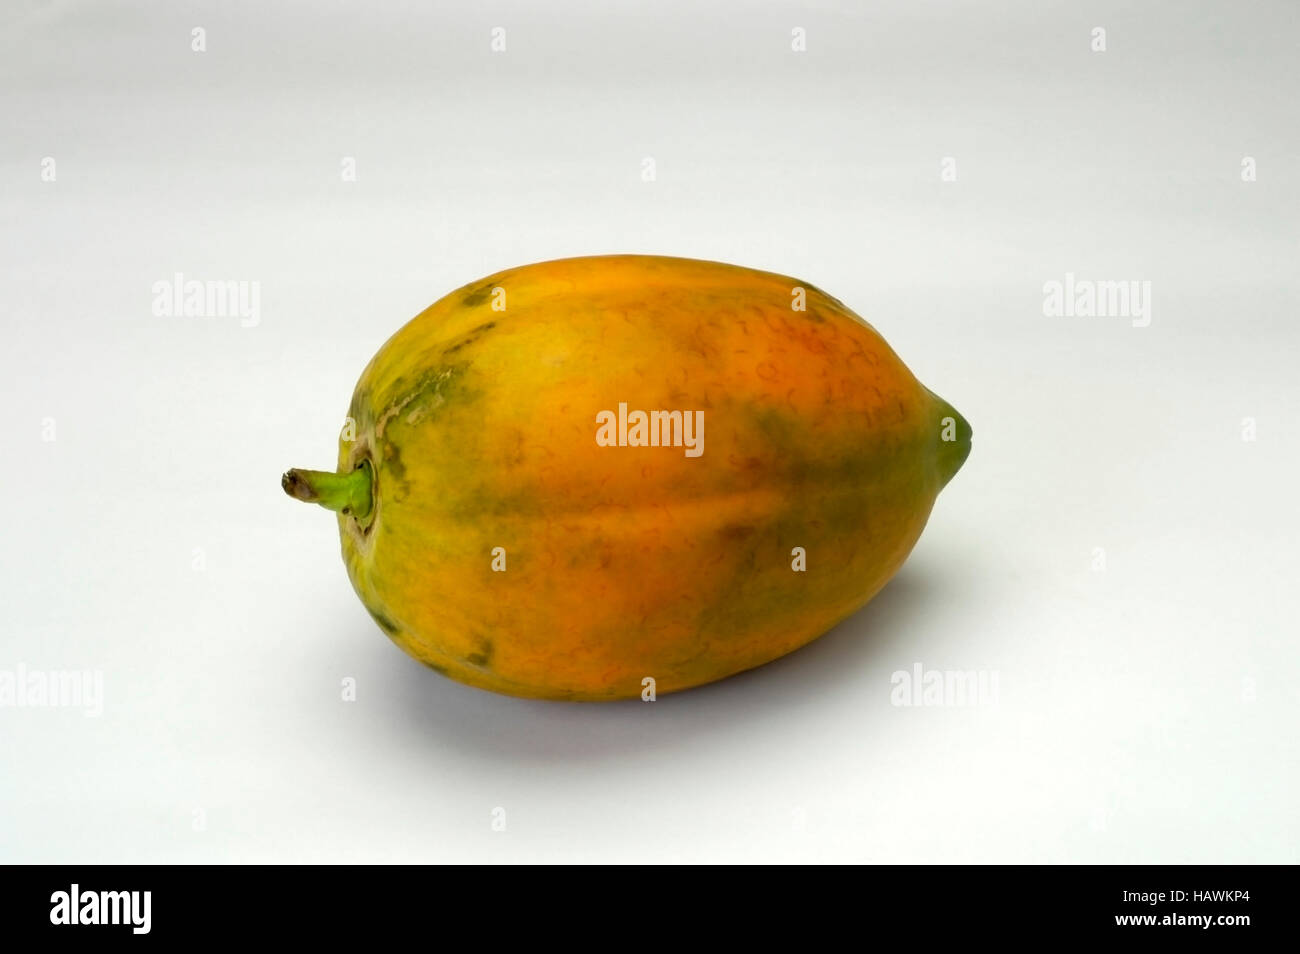 Papaya, Carica papaya, Caricaceae, Papayas are bell-shaped, with one end much smaller than the other. Stock Photo